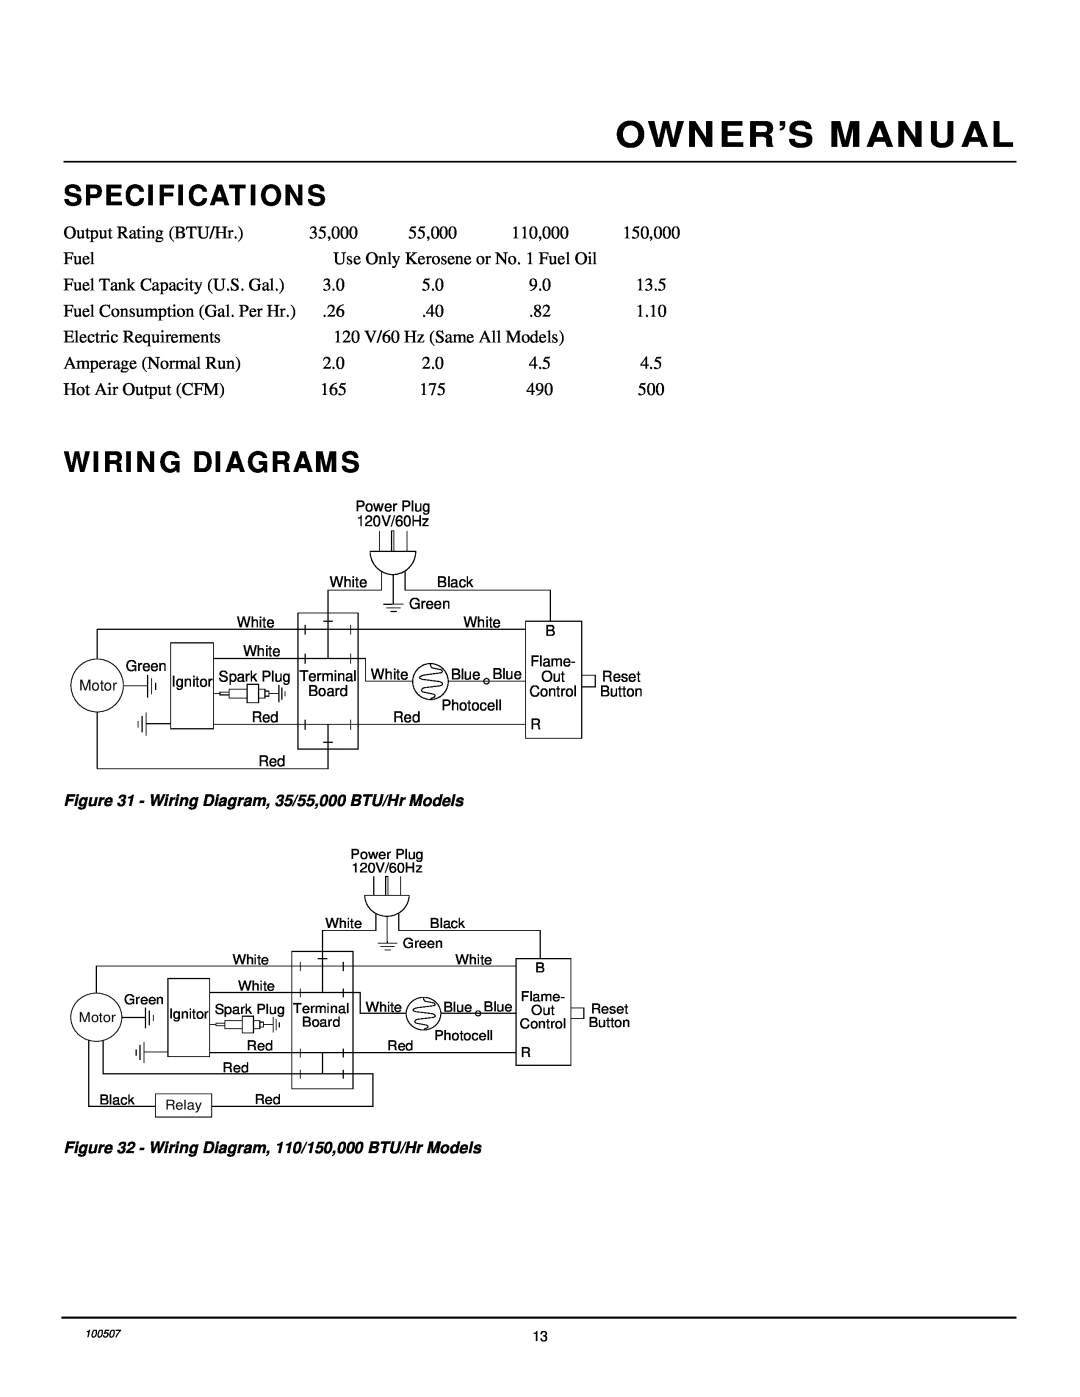 Homelite HH55, HH35A, HH110 & HH150A owner manual Specifications, Wiring Diagrams 